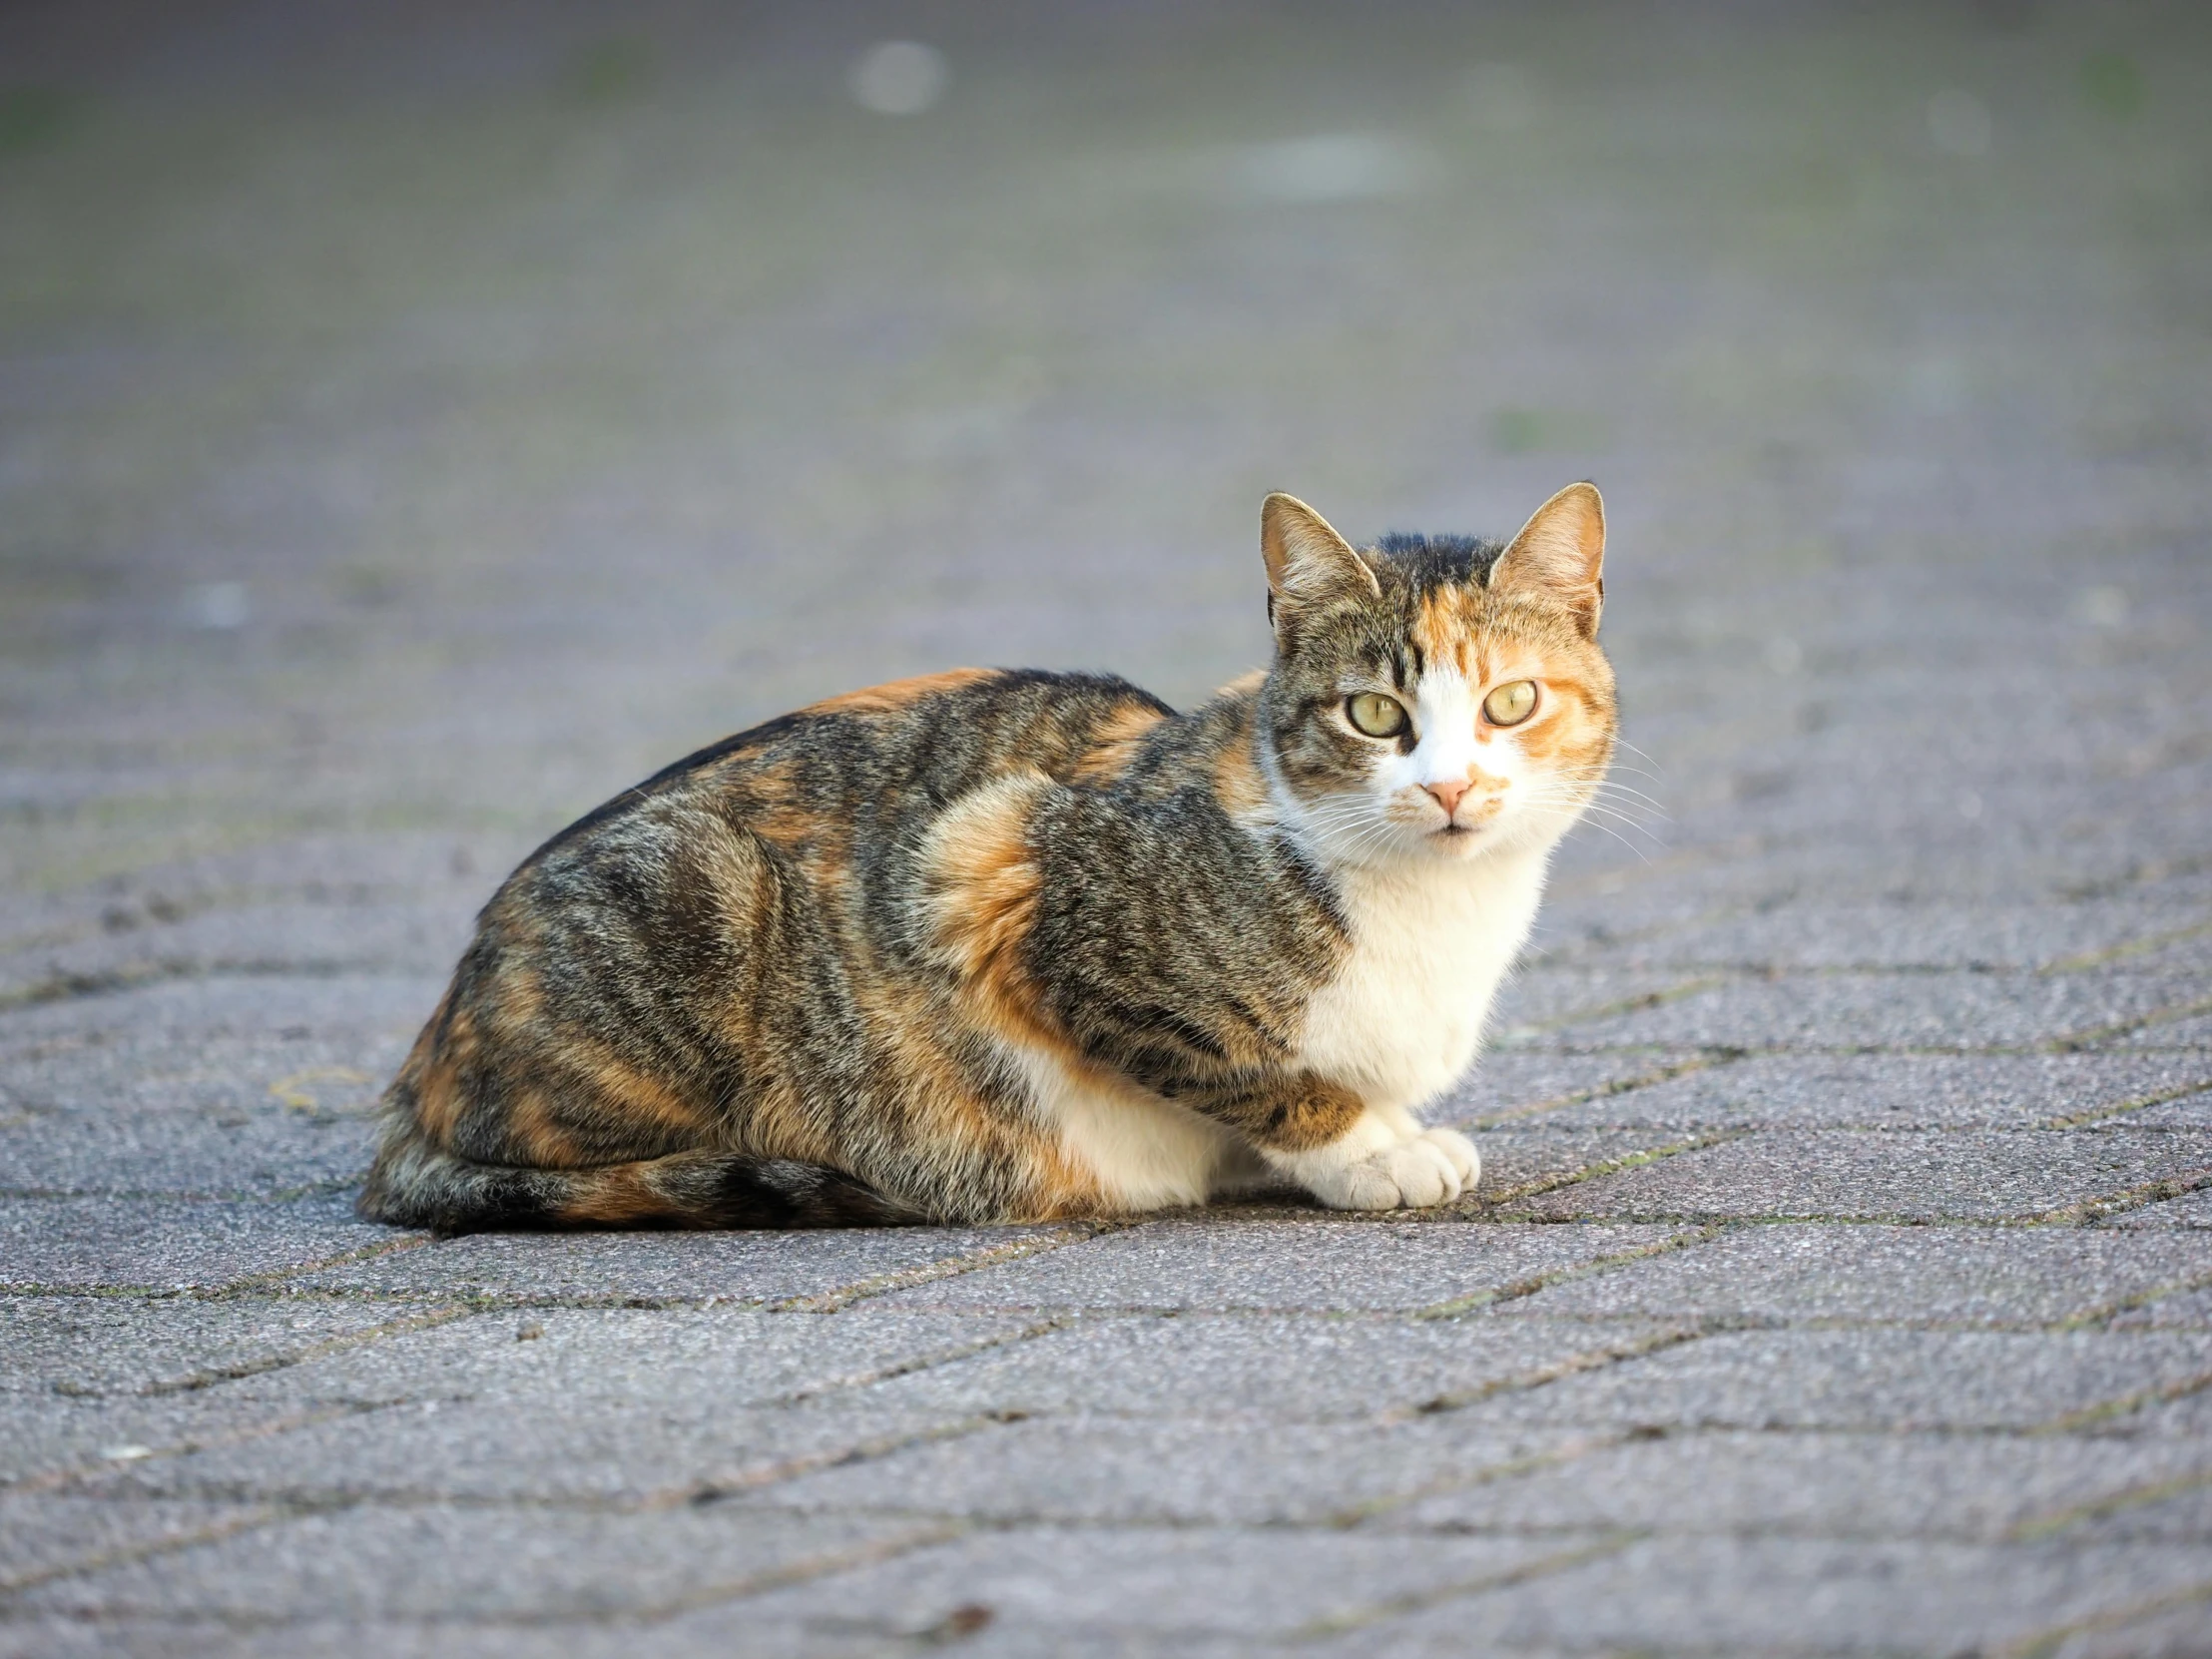 a cat sitting on the ground outside with a blurred background